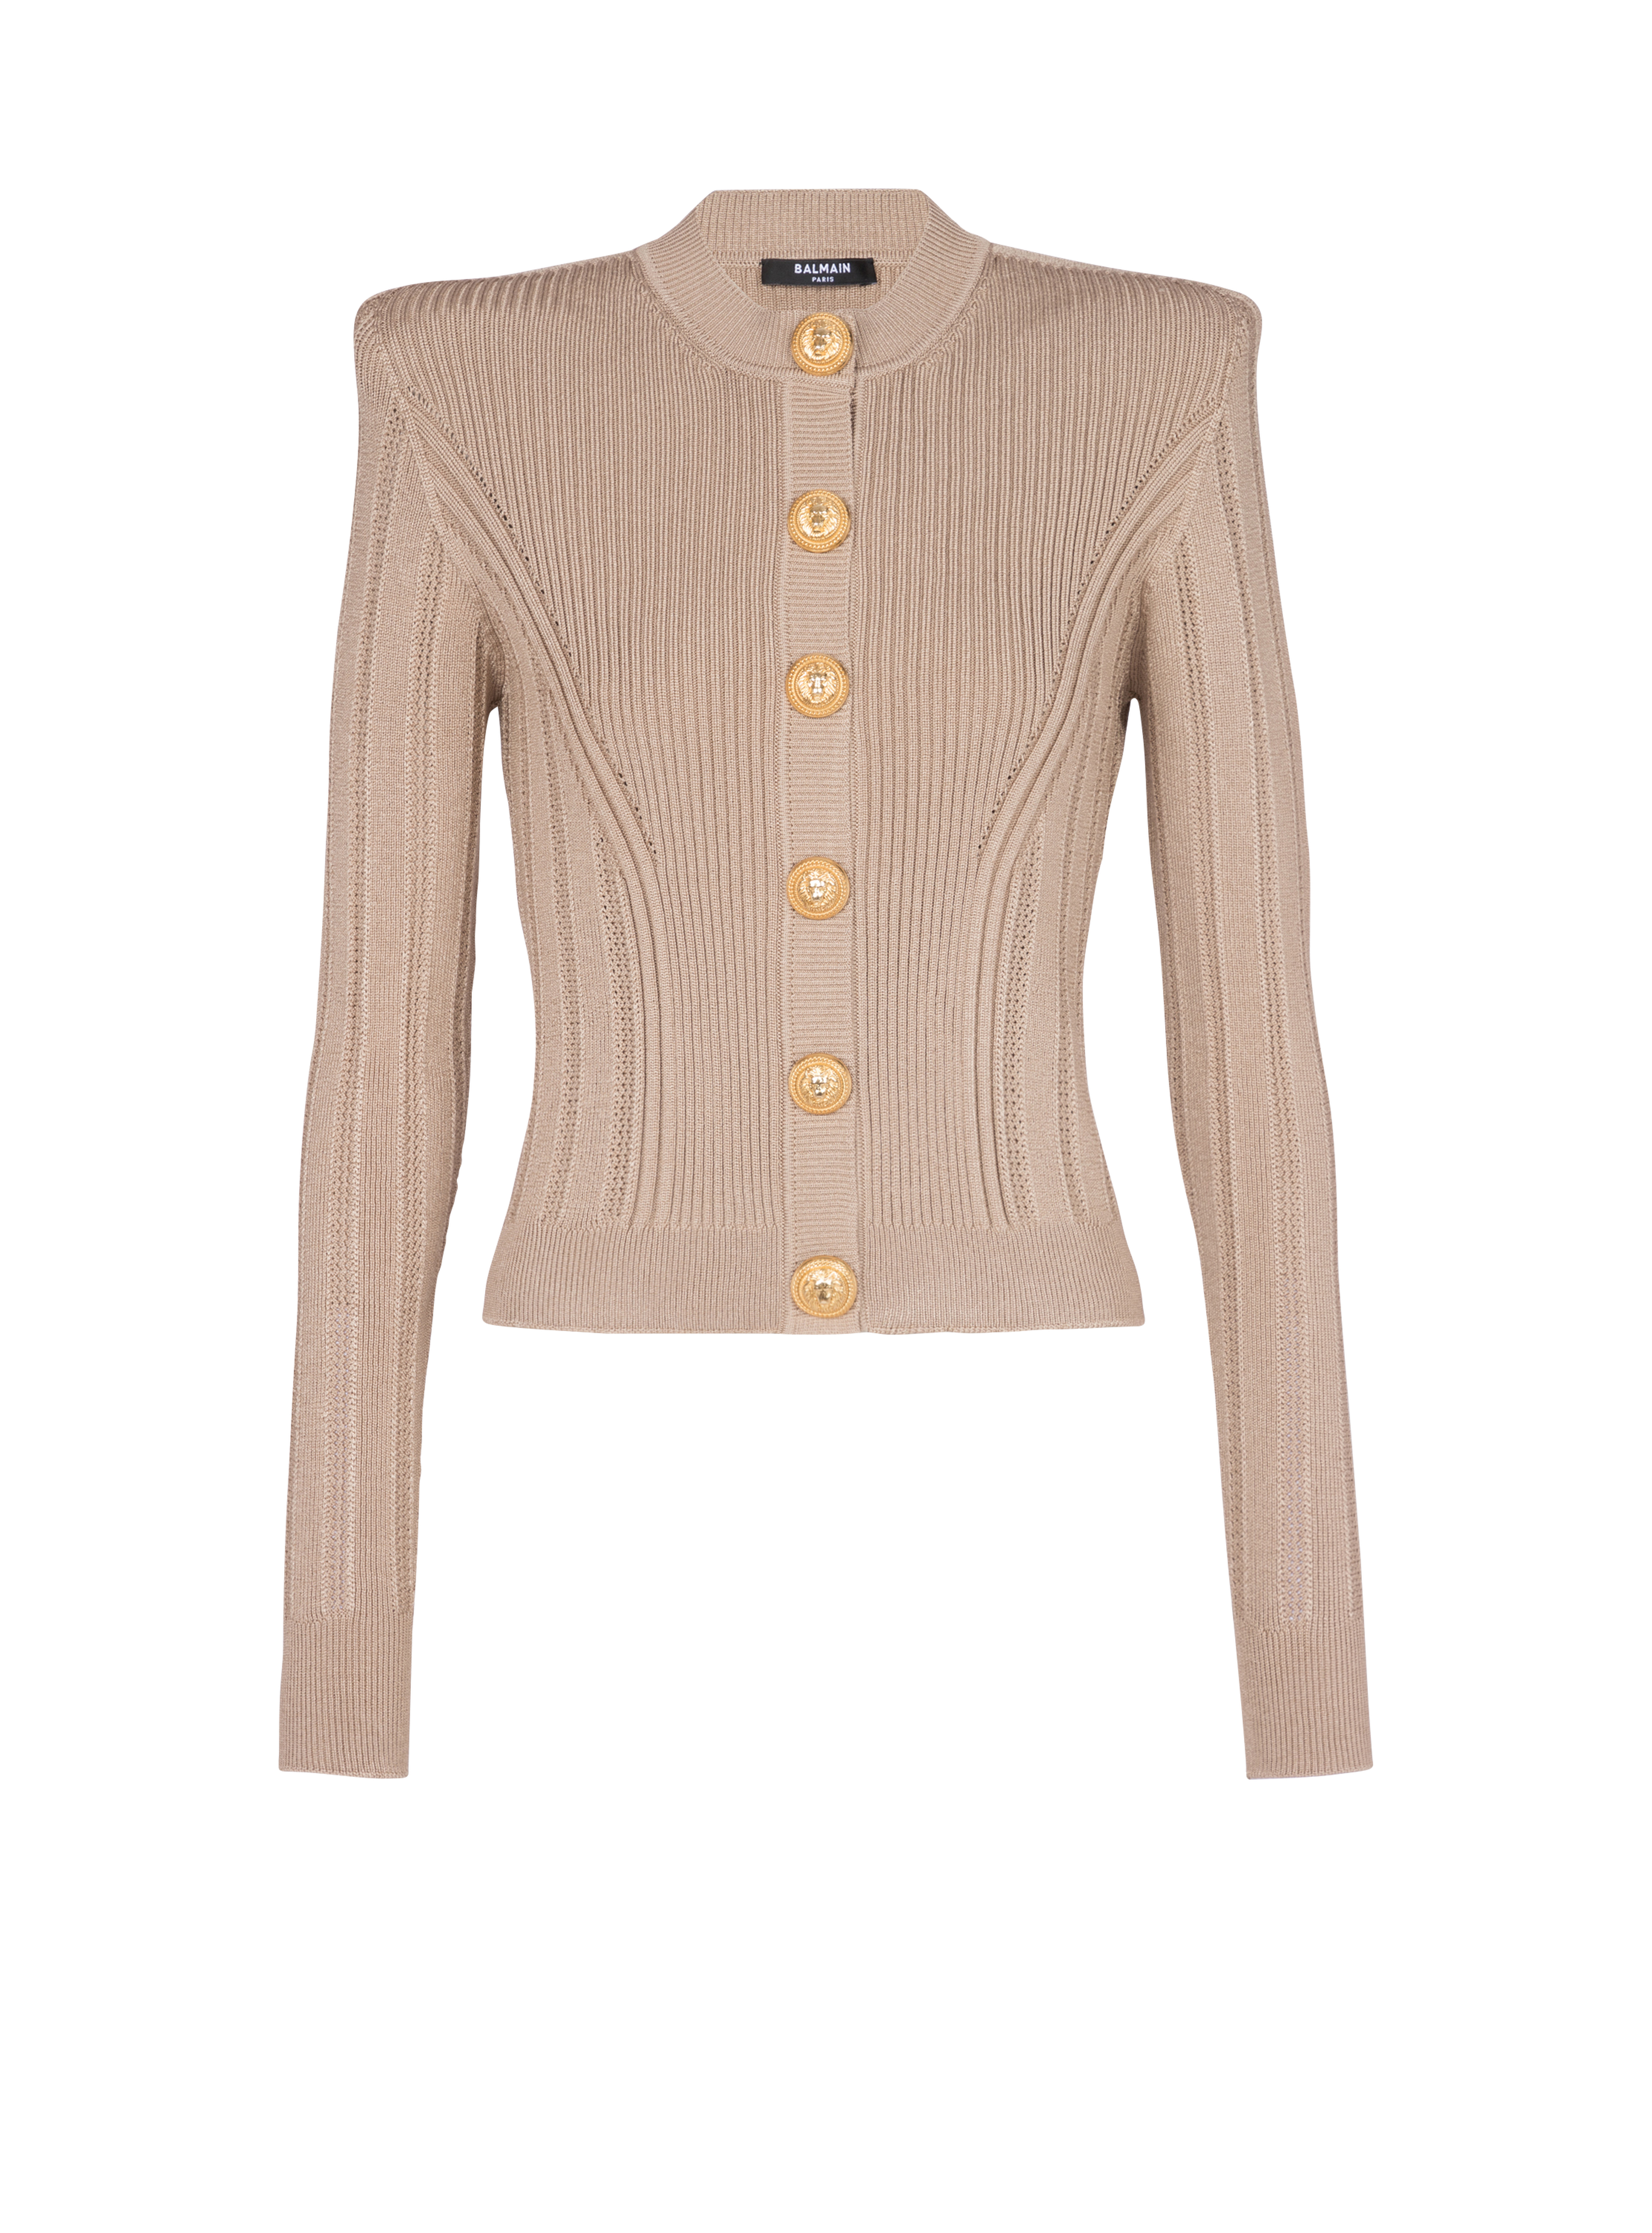 Knit cardigan with gold buttons, brown